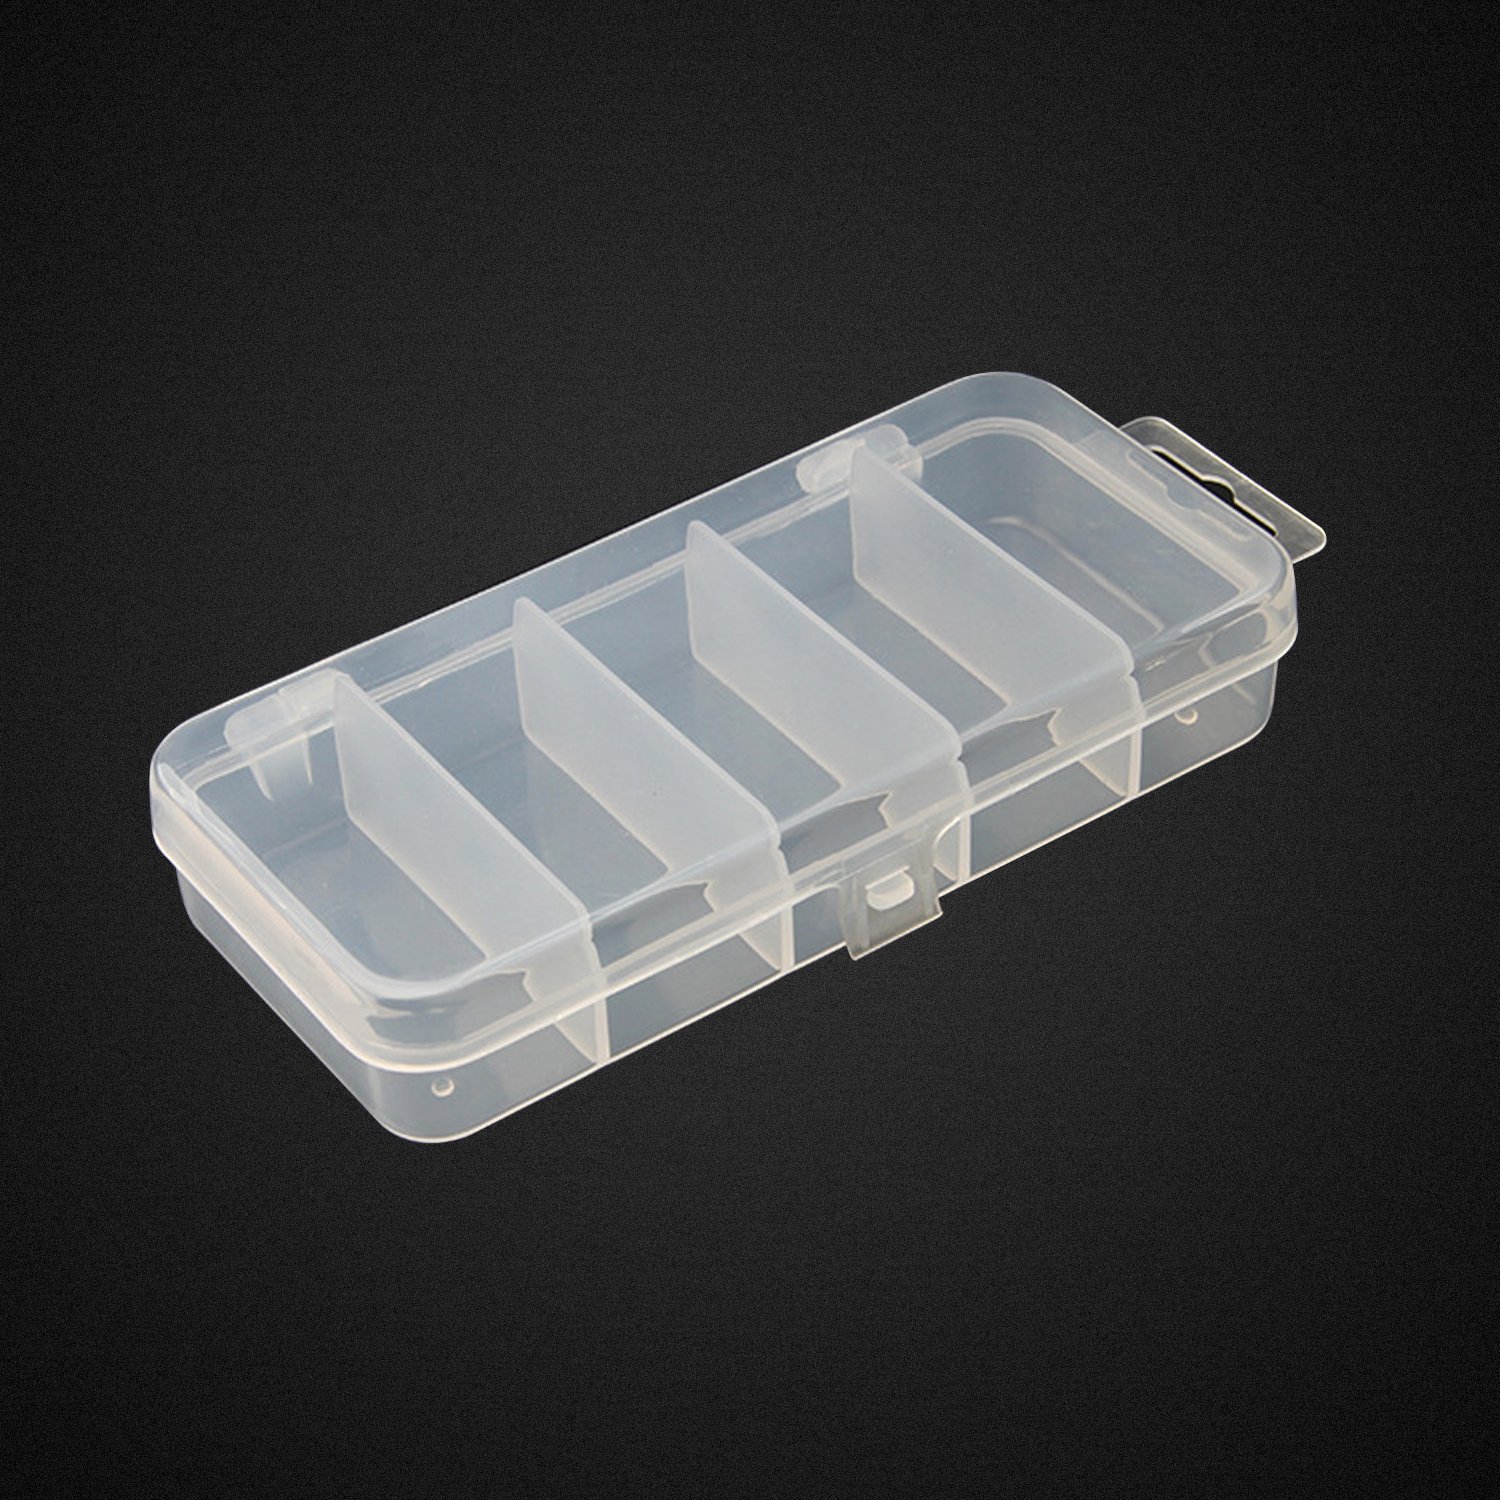 Honbay 2PCS 5x2.4x1Inch Small Clear Visible Plastic Fishing Tackle  Accessory Box Fishing Lure Bait Hooks